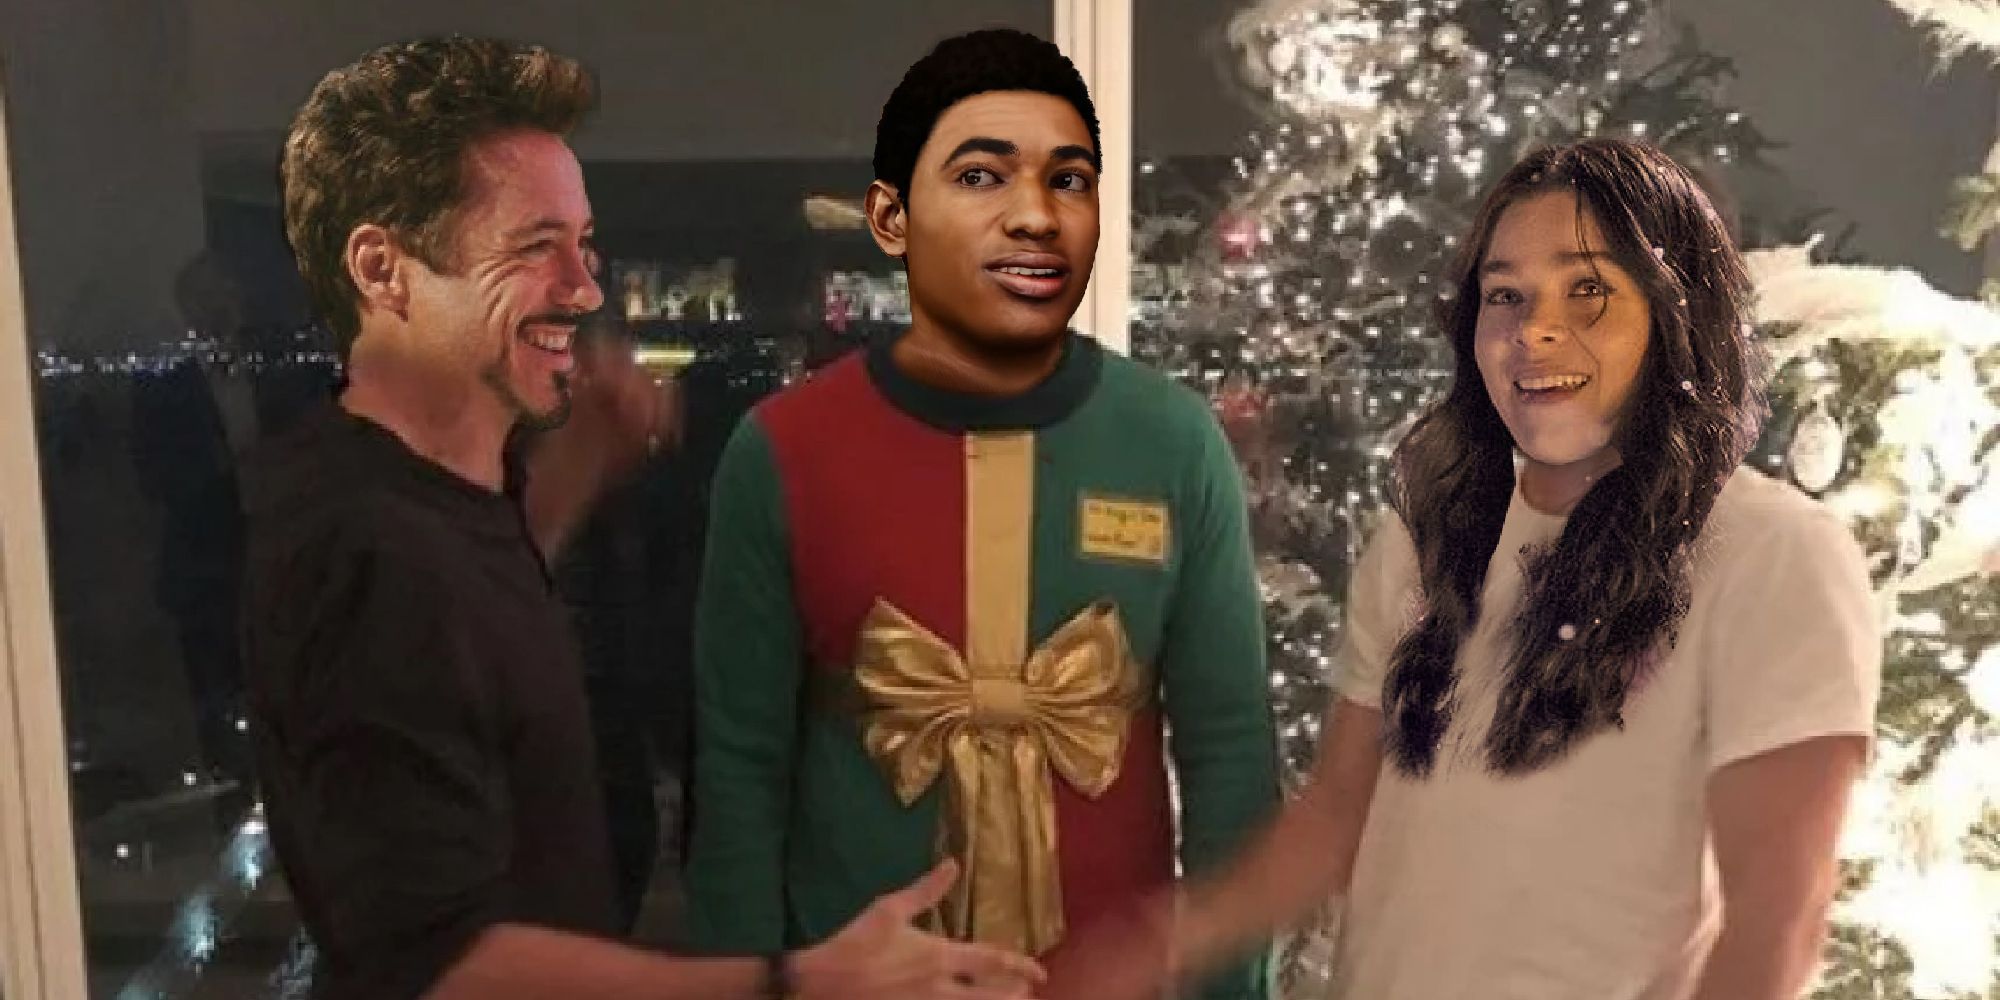 Robert Downey Jnrs Iron Man, Insomniac's Miles Morales, and Hailee Steinfeld's Kate Bishop dressed up for Christmas